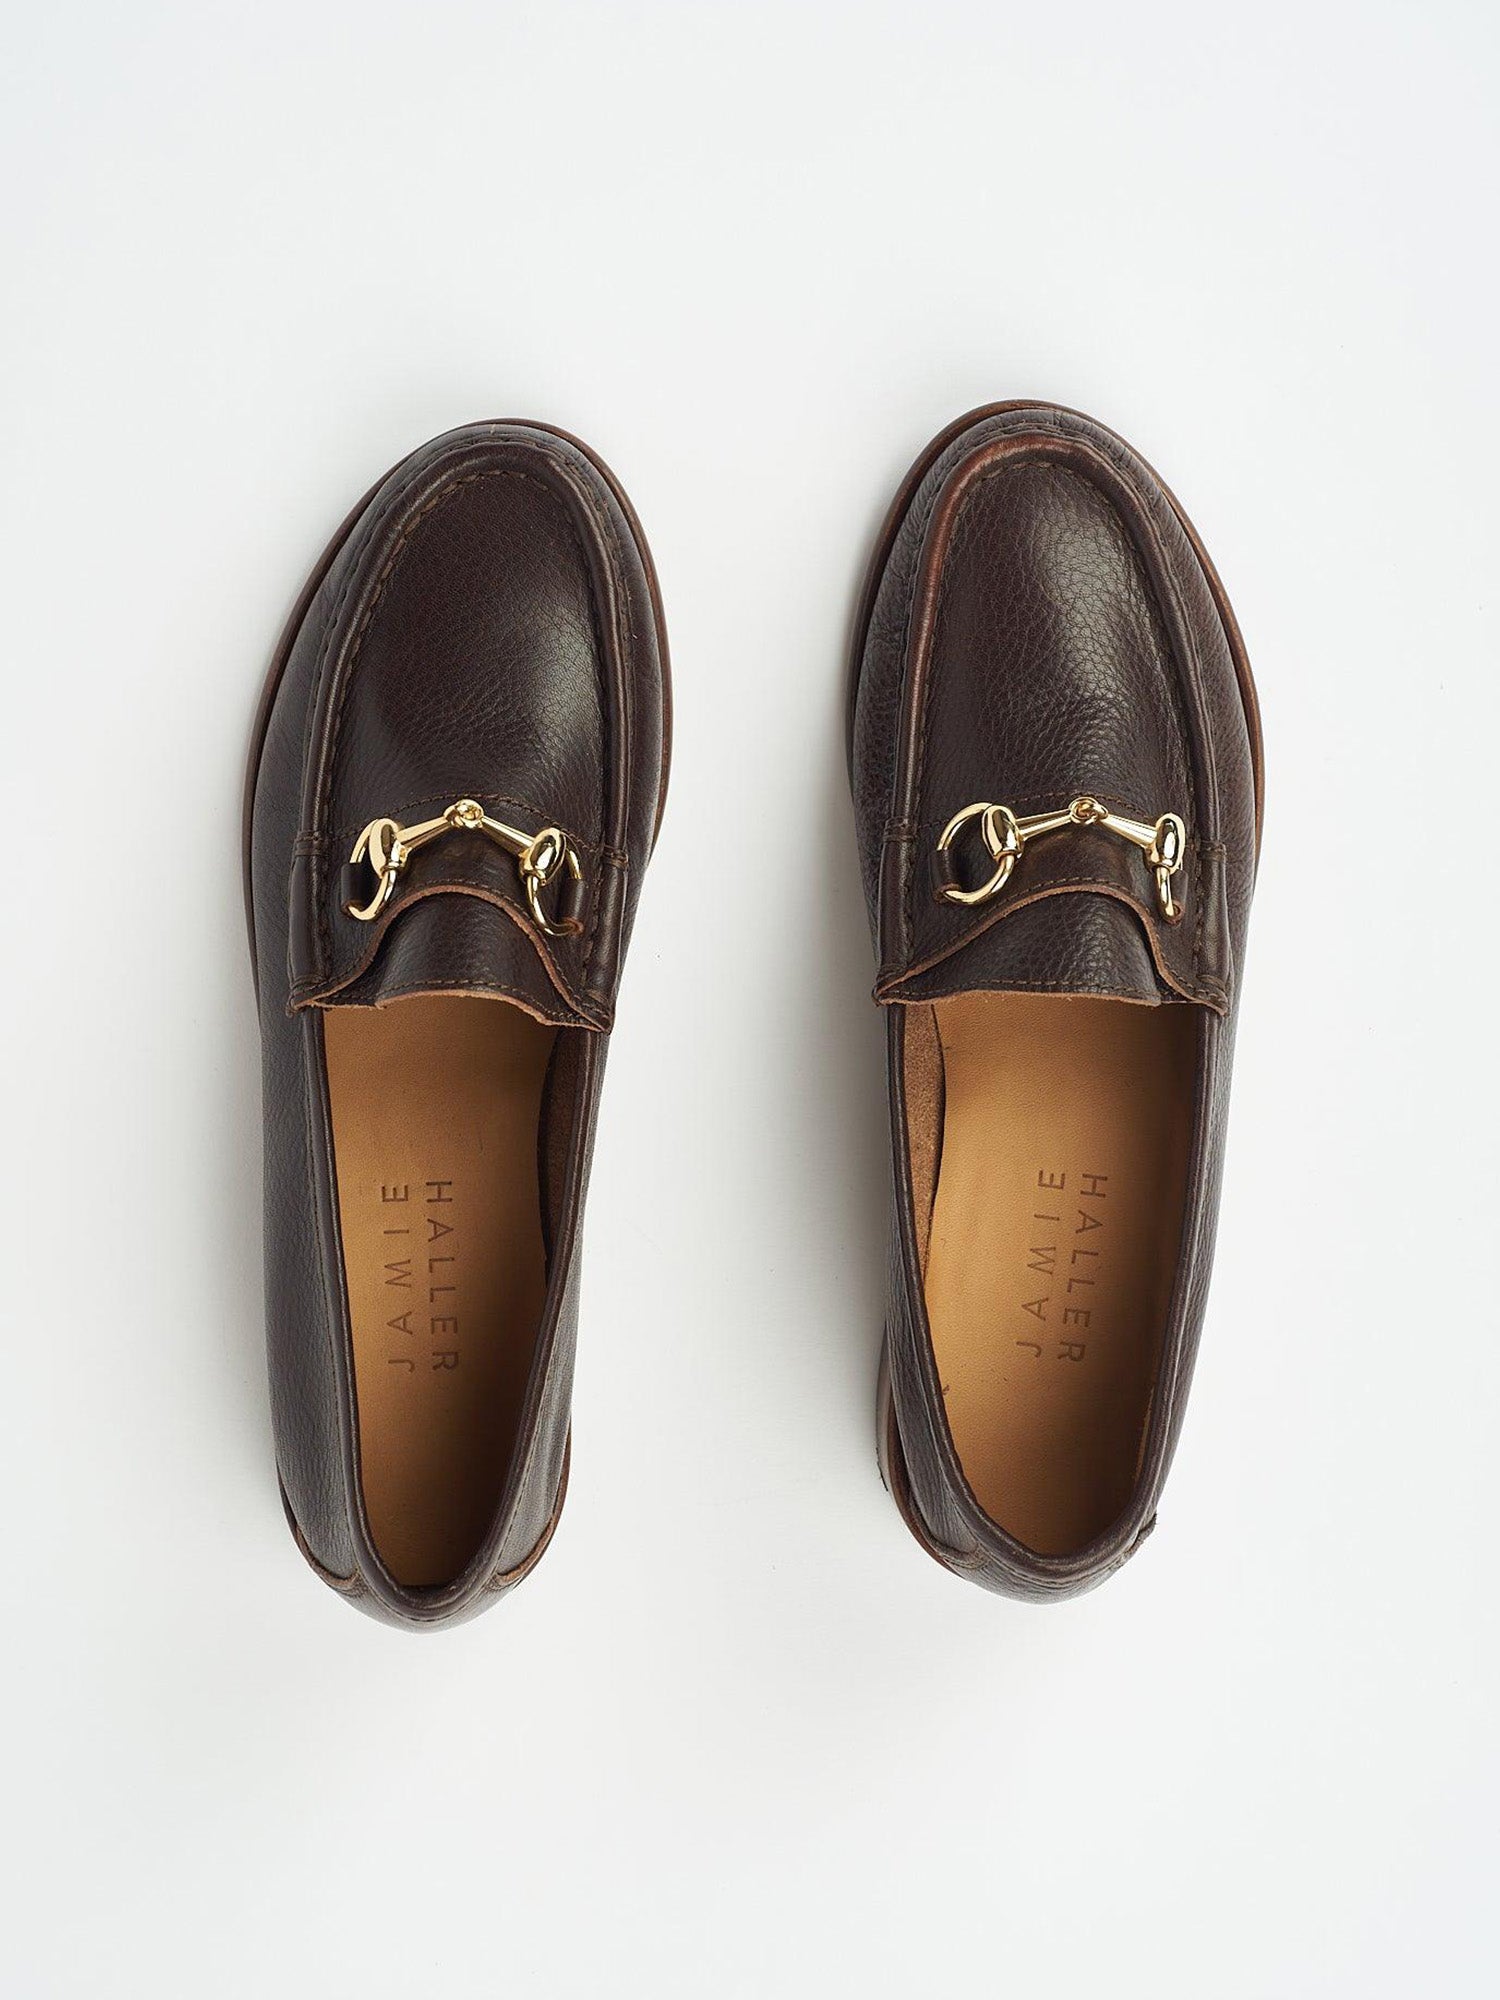 The Bit Loafer in Castagno Flat View